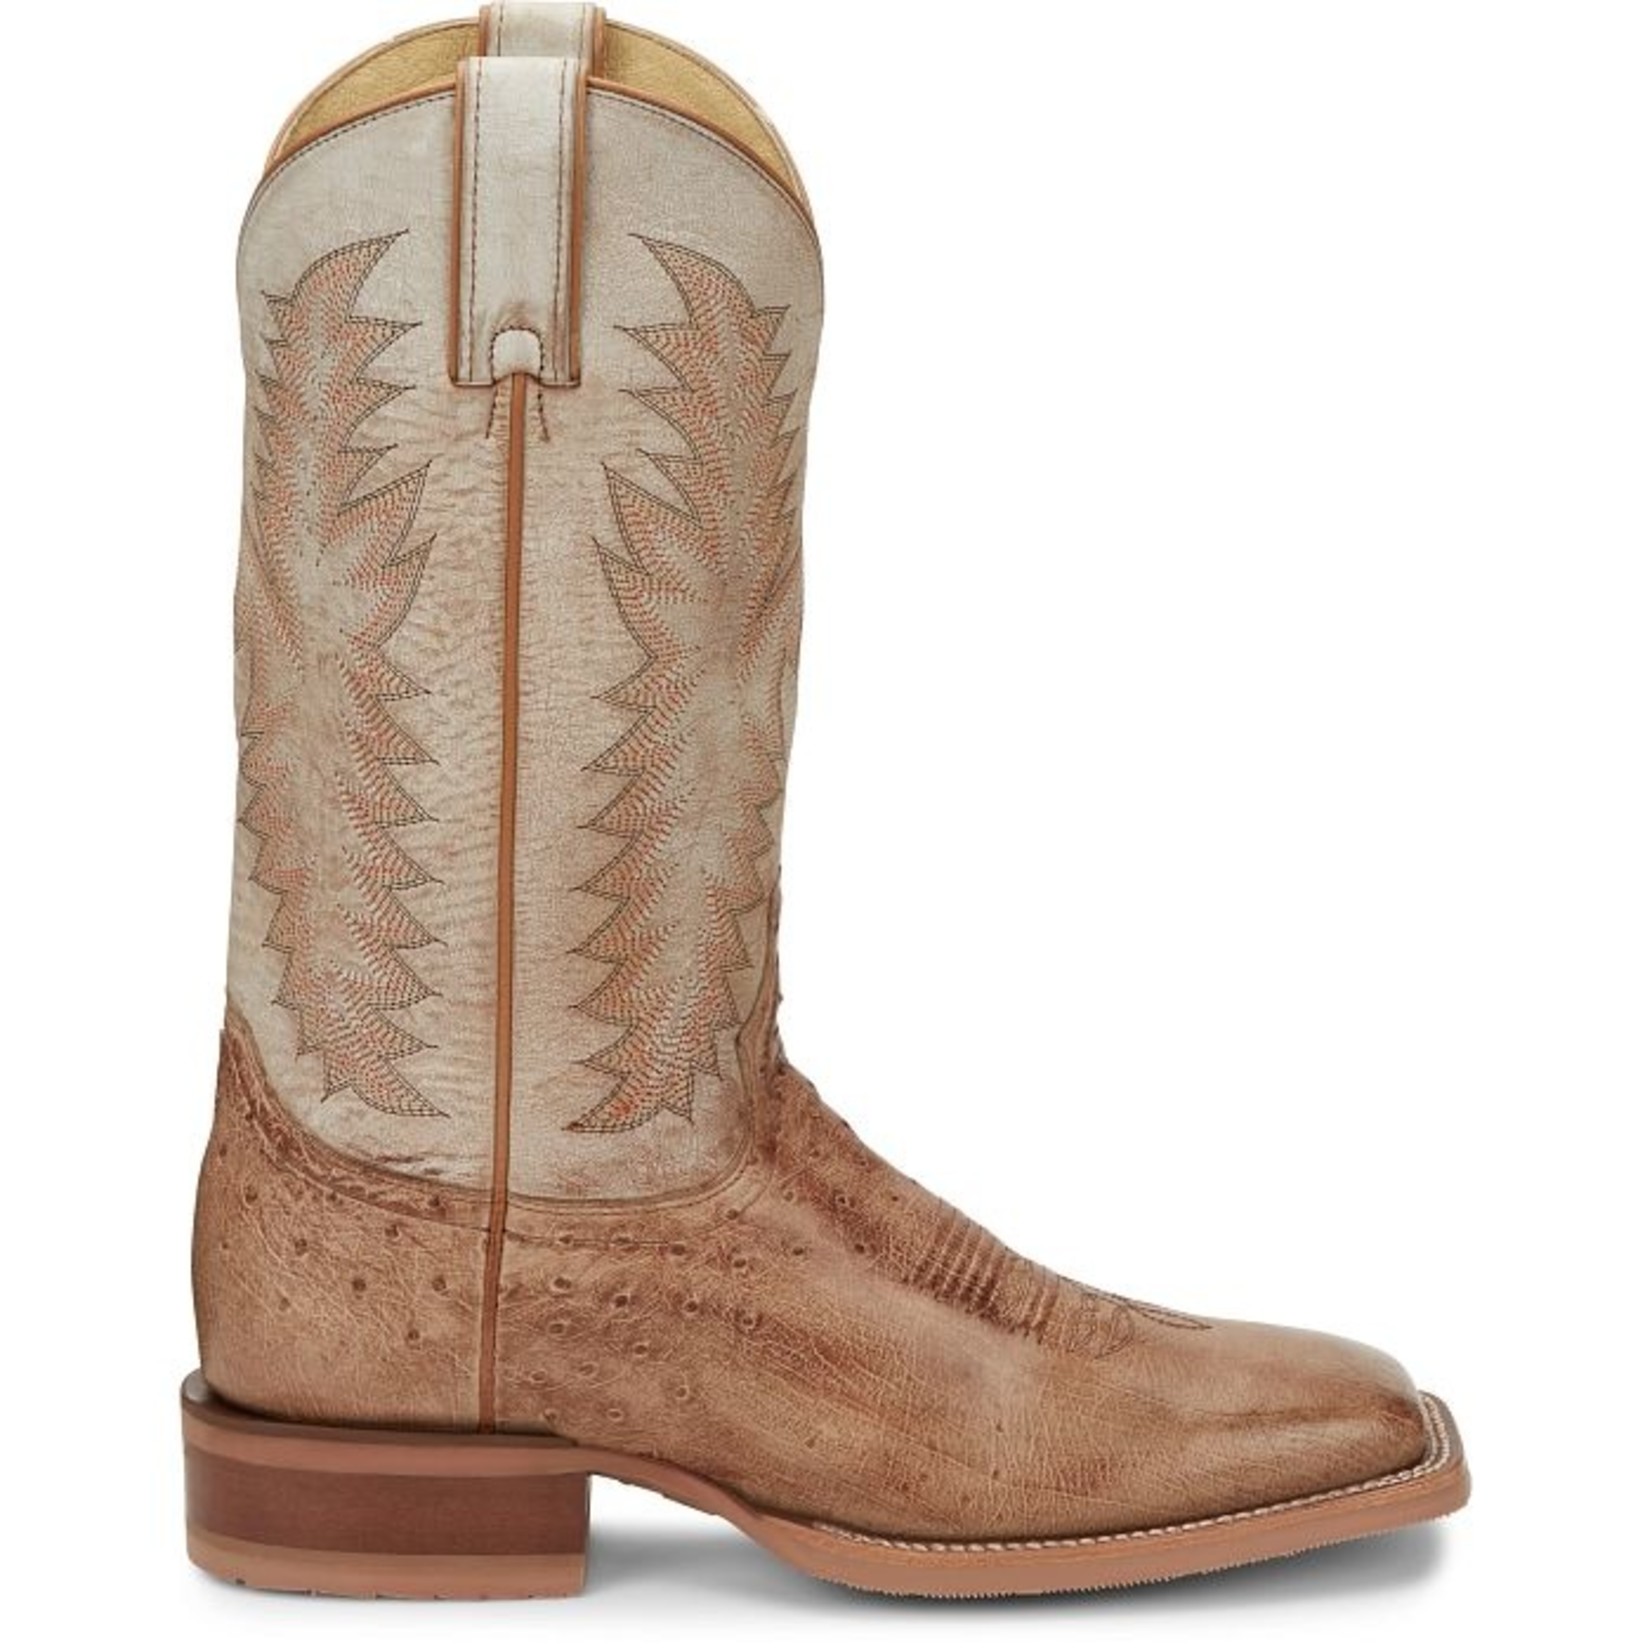 JUSTIN BOOTS 13" BRECK SMOOTH OSTRICH IVORY WESTERN